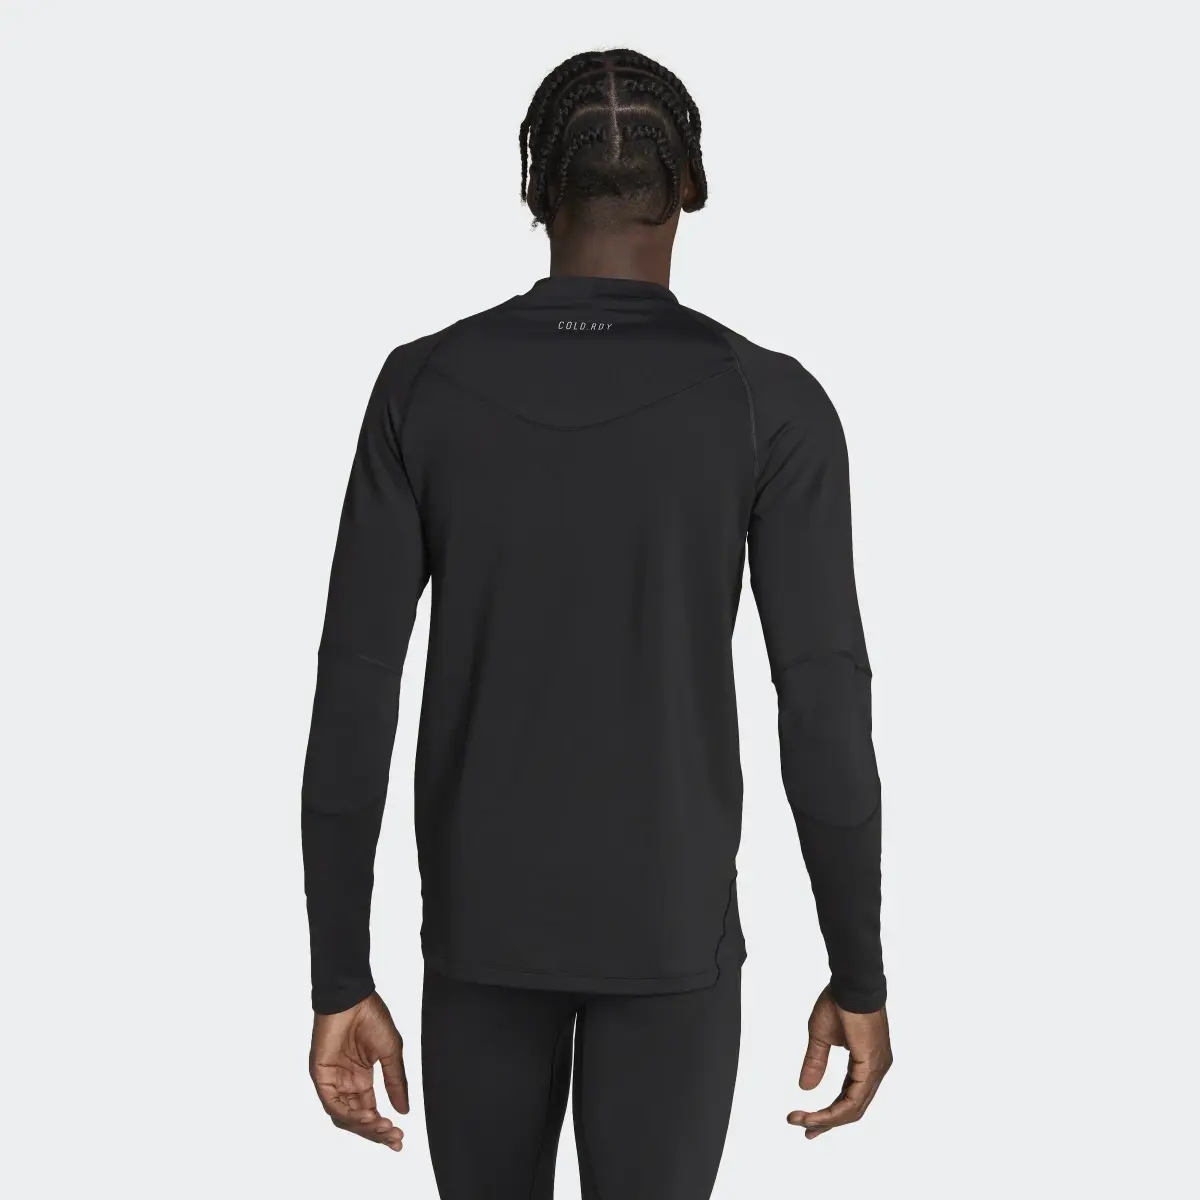 Adidas Techfit COLD.RDY Training Long-Sleeve Top. 3